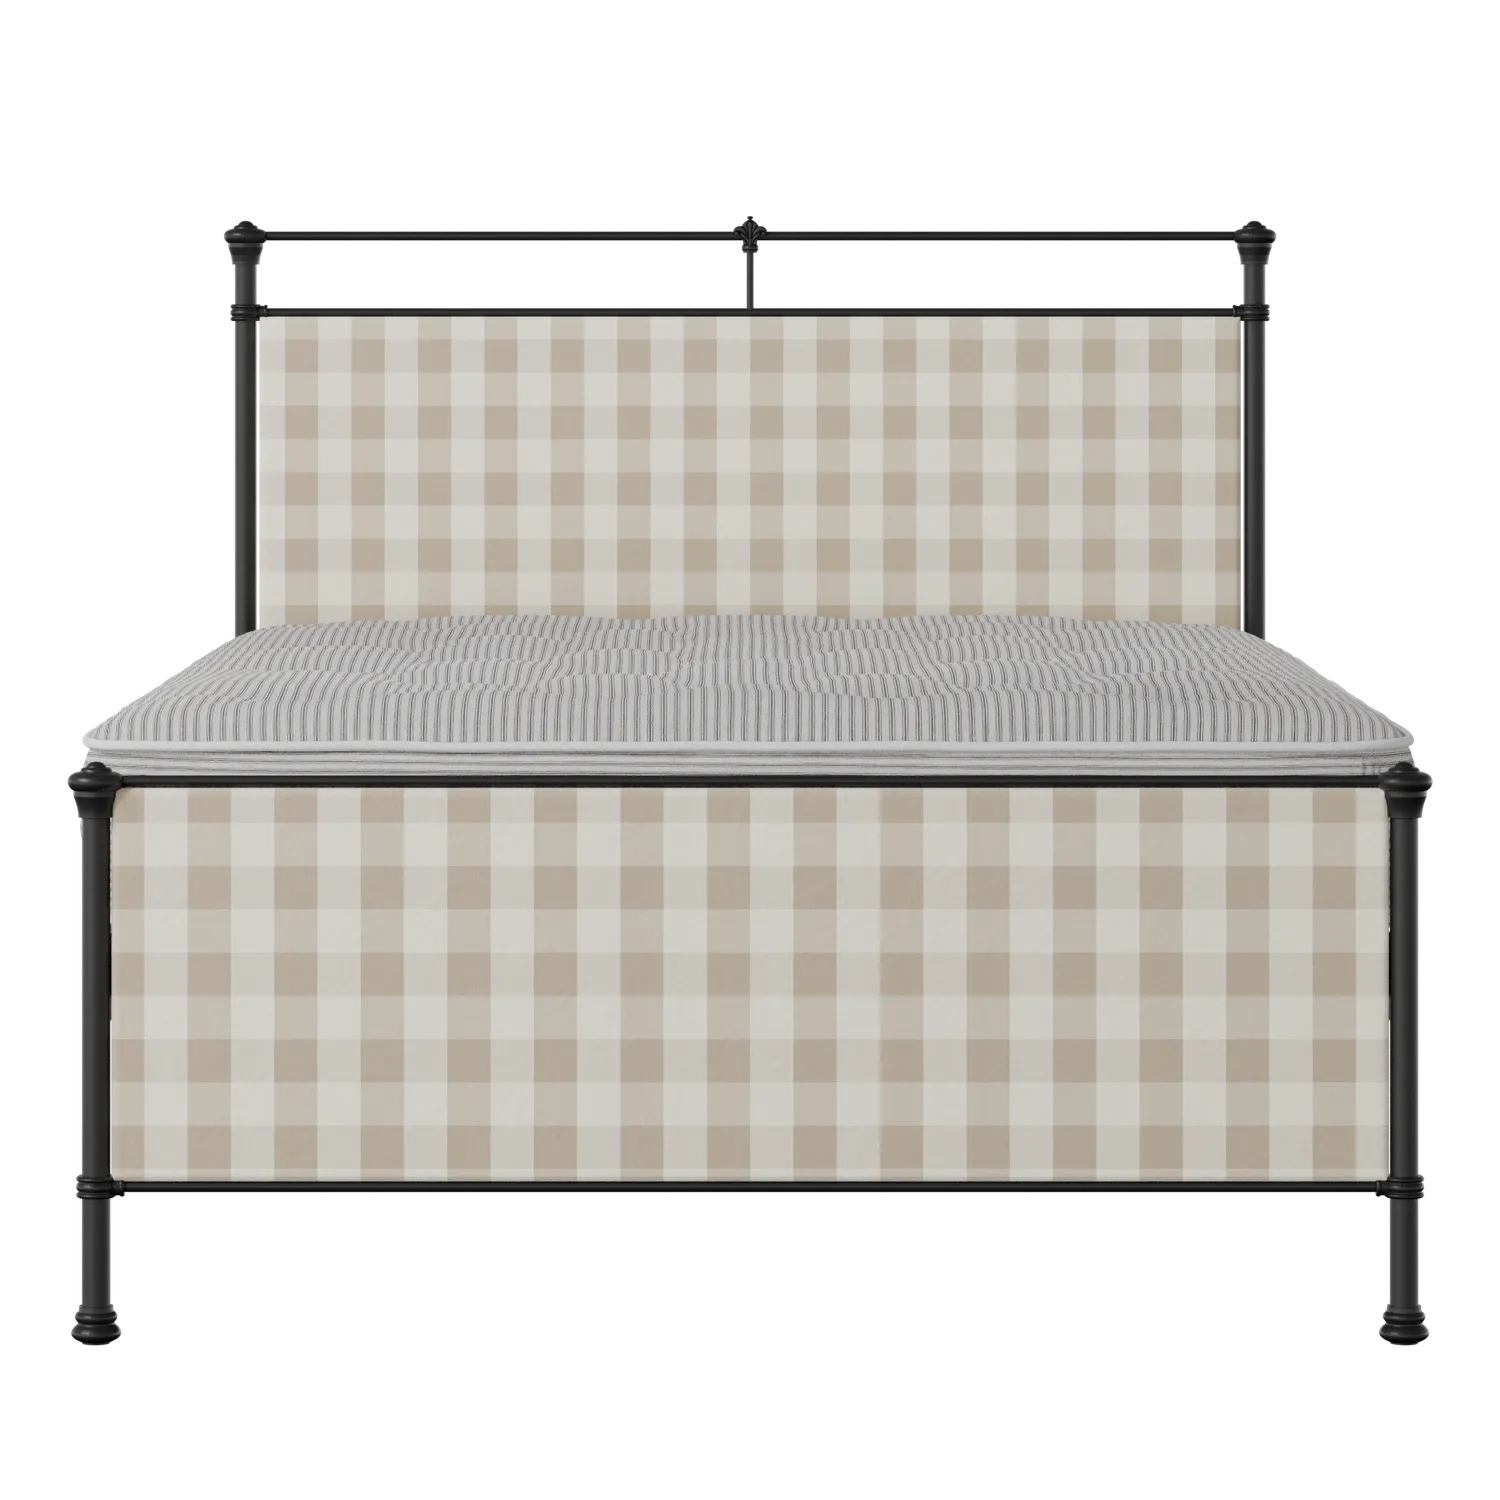 Nancy iron/metal upholstered bed in black with Romo Kemble Putty fabric